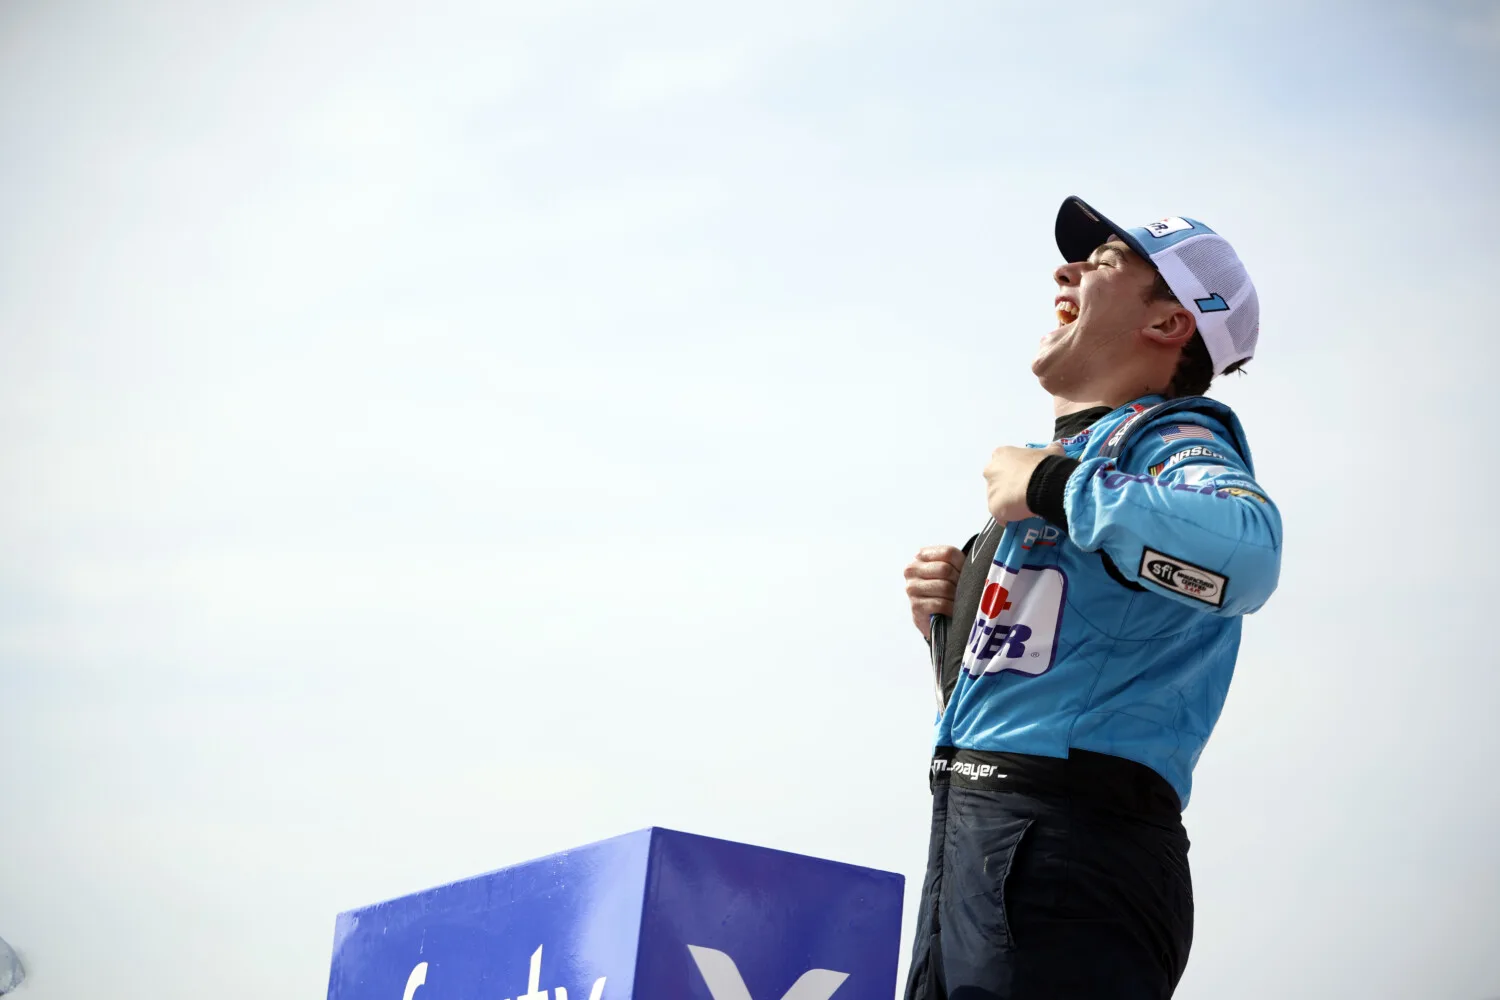 Mayer Holds off Herbst for Overtime NASCAR Xfinity Series Win at Iowa – Motorsports Tribune